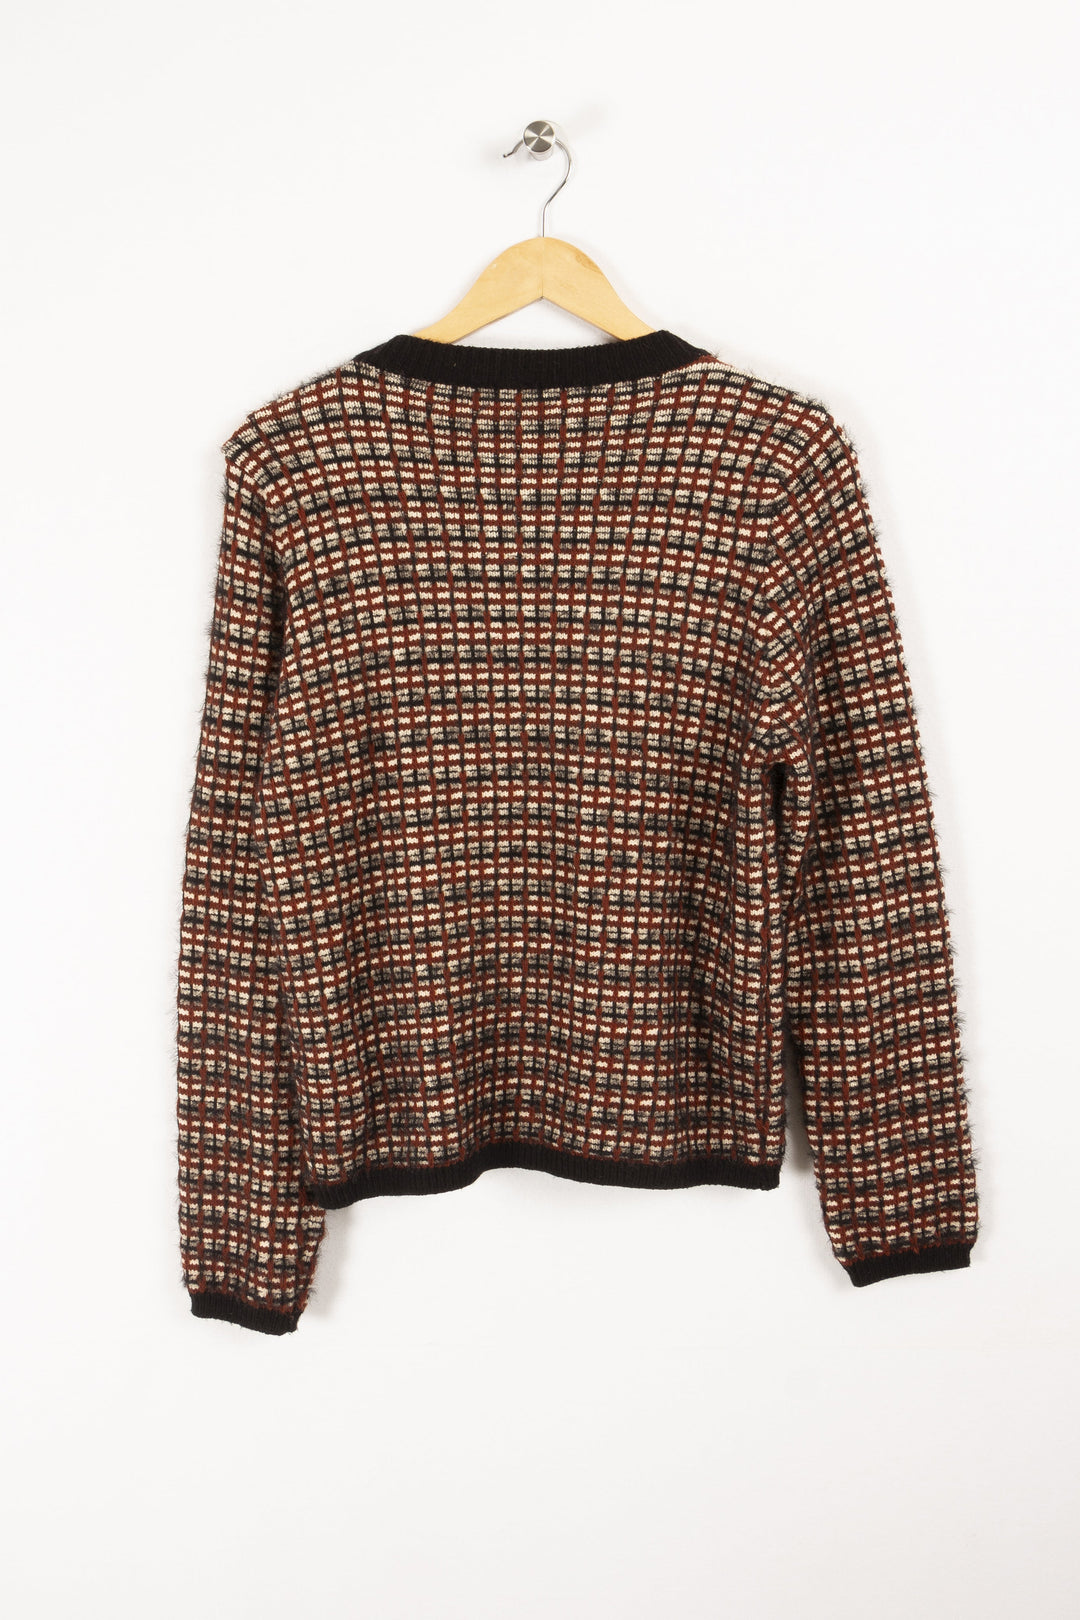 Multicolored black and brown cardigan - S/36